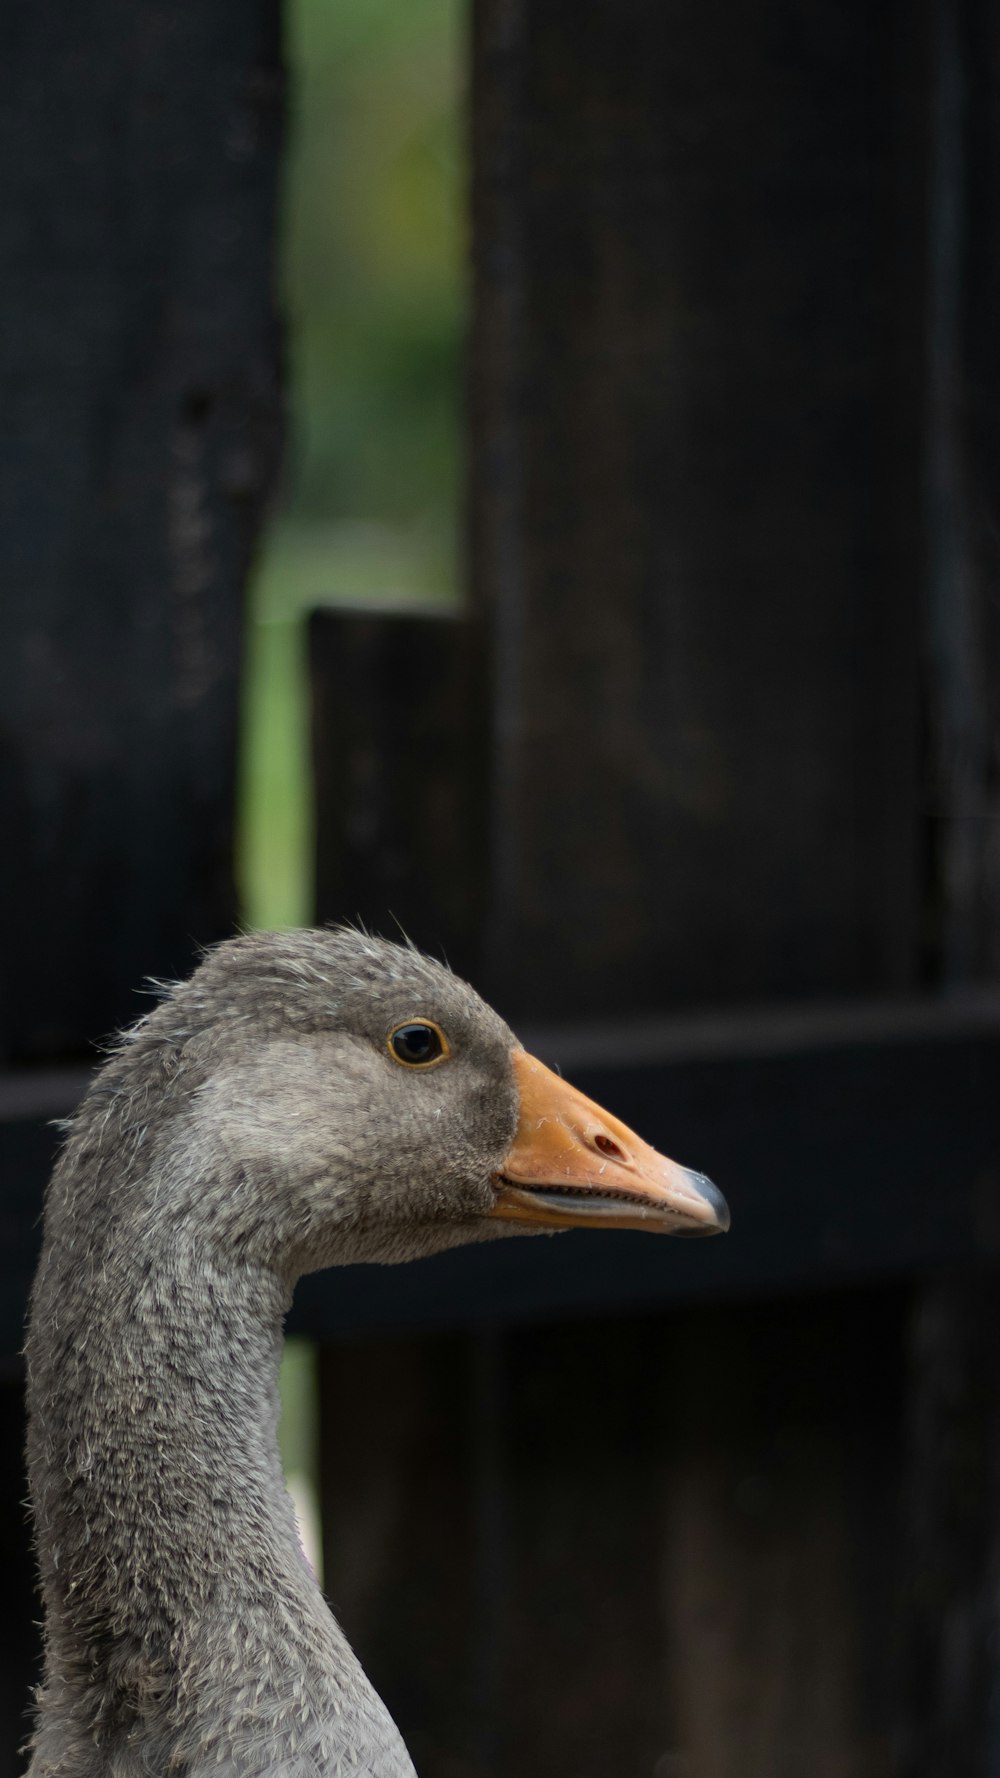 grey duck in close up photography